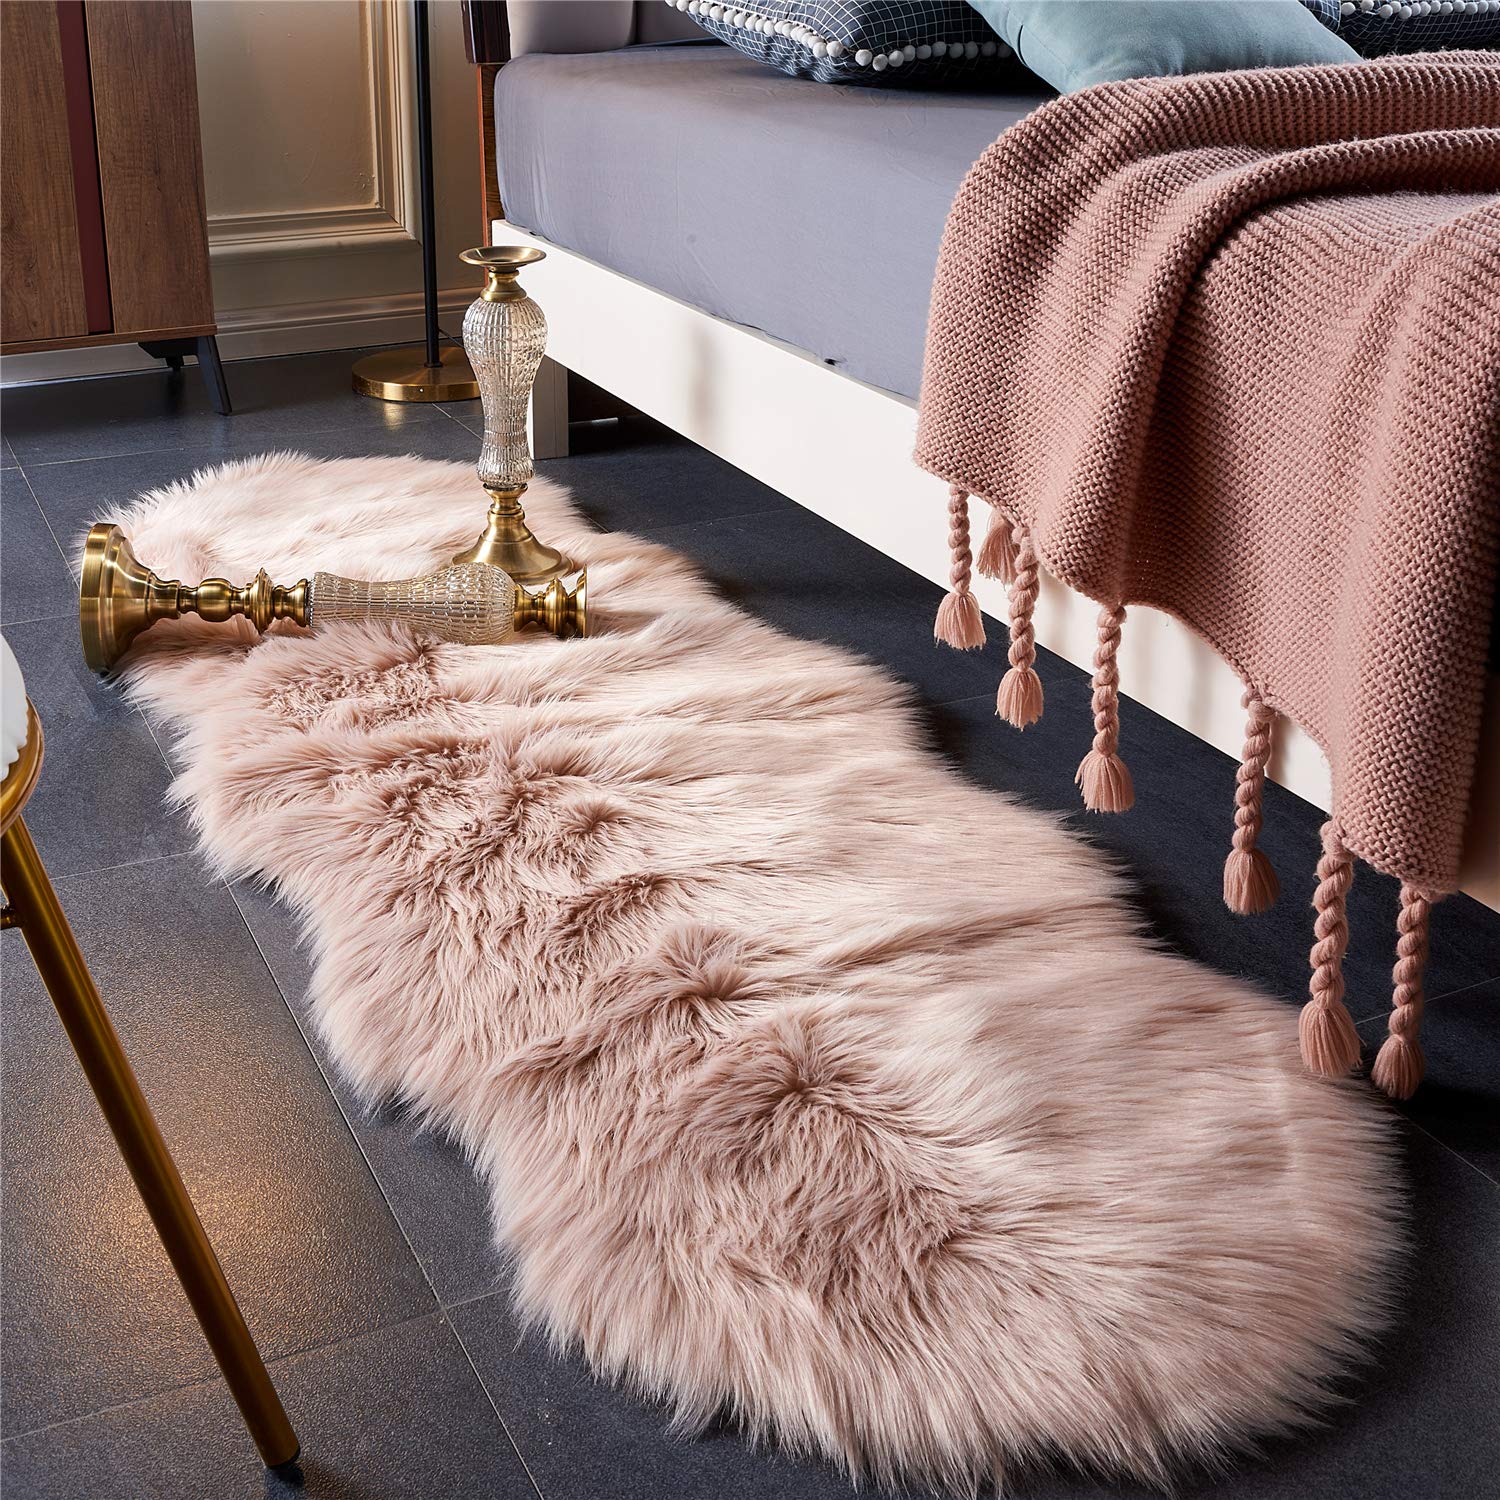 EasyJoy Ultra Soft Fluffy Shaggy Area Rug Faux Fur Rug chair cover Seat Pad Fuzzy Area Rug for Bedroom Floor Sofa Living Room (2